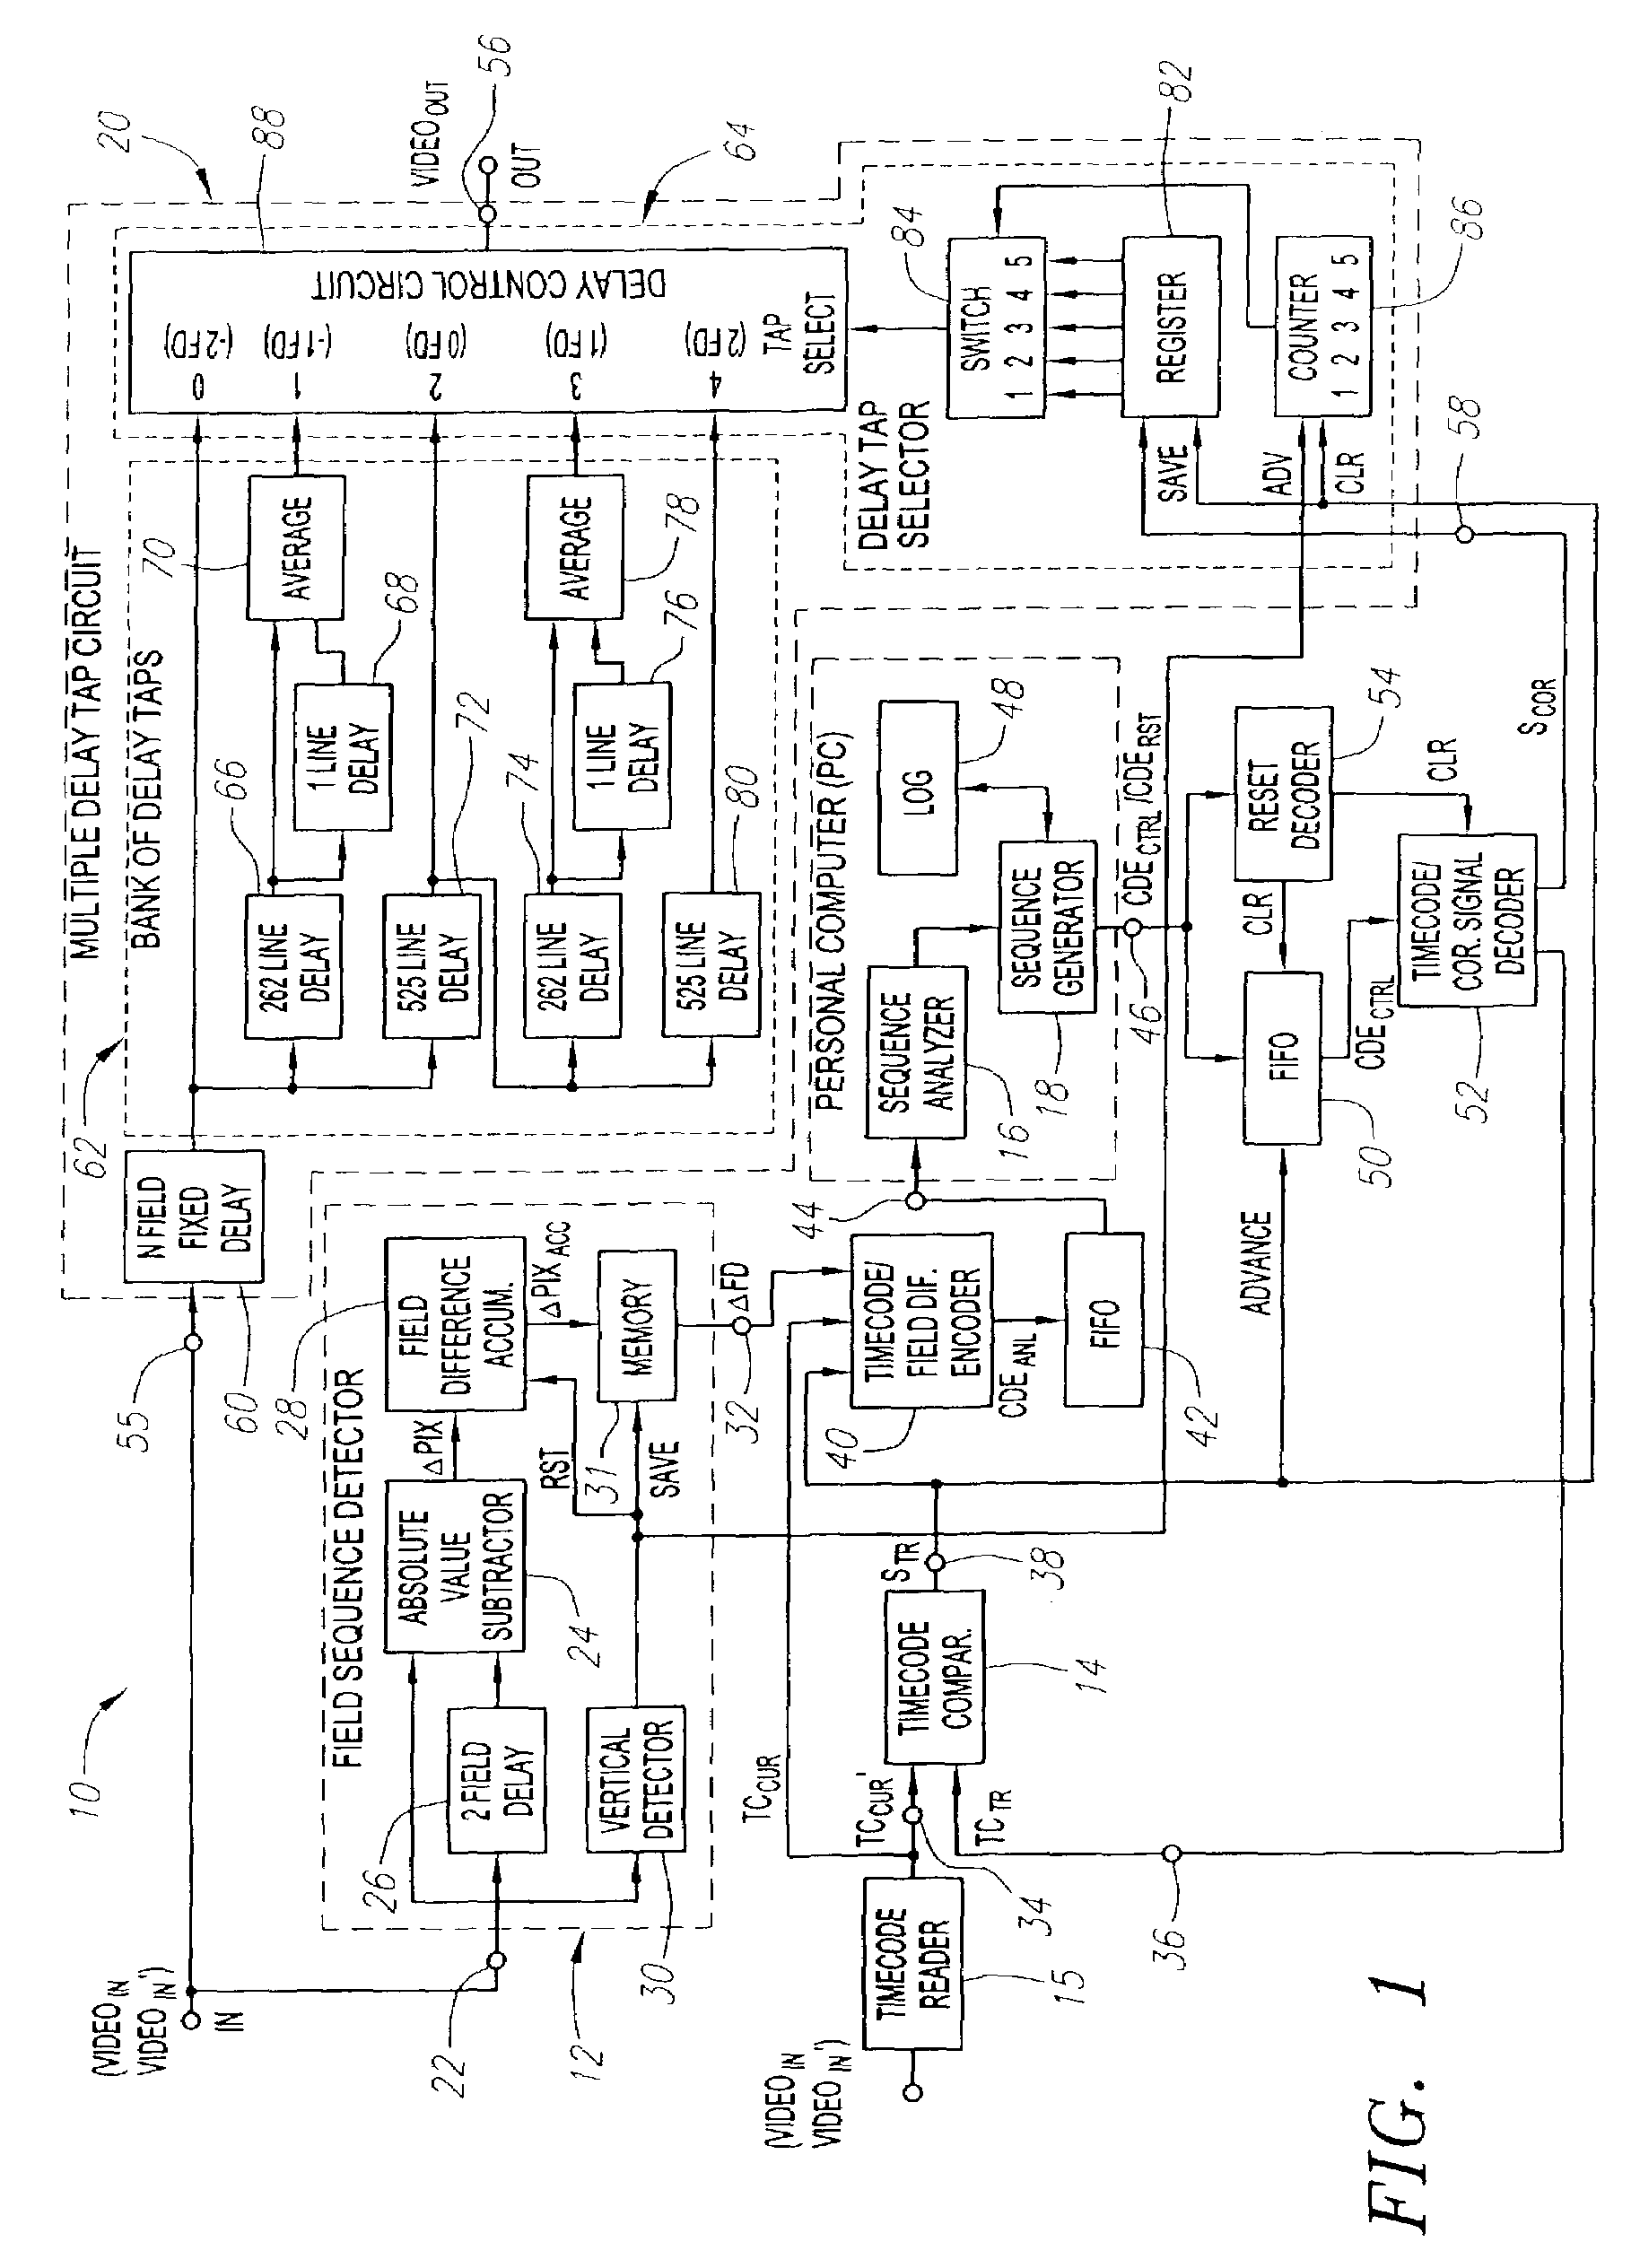 Methods and apparatus for correction for 2-3 field patterns